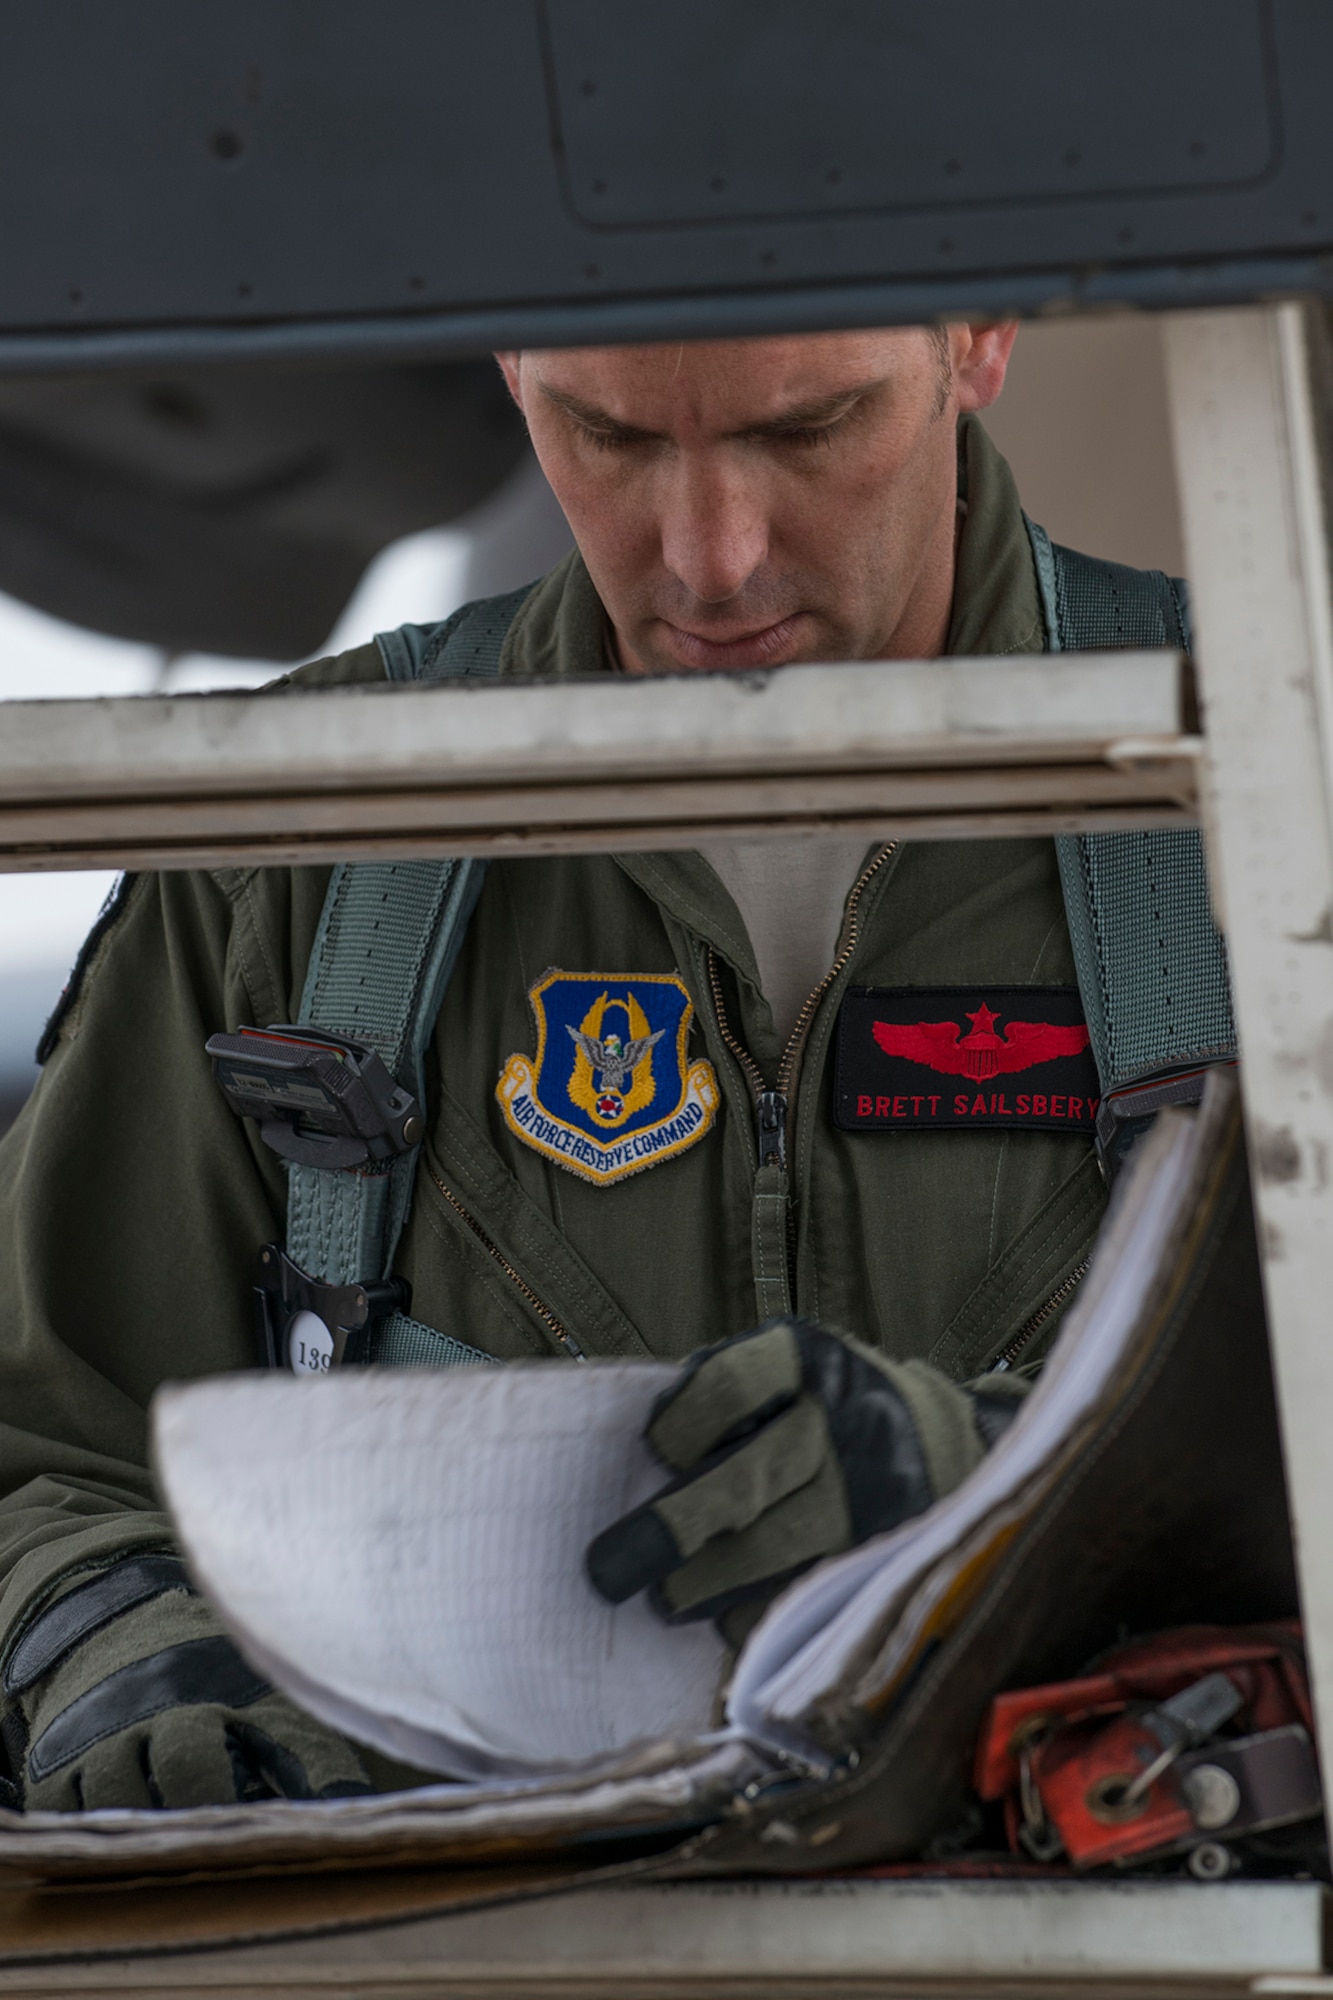 U.S. Air Force Maj. Brett Sailsbury checks the aircraft forms of a B-1 Lancer prior to a mission on Feb. 20, 2016, Dyess Air Force Base, Texas. Sailsbury is a B-1 pilot assigned to the Air Force Reserve Command’s 345th Bomb Squadron. (U.S. Air Force photo by Master Sgt. Greg Steele/Released)